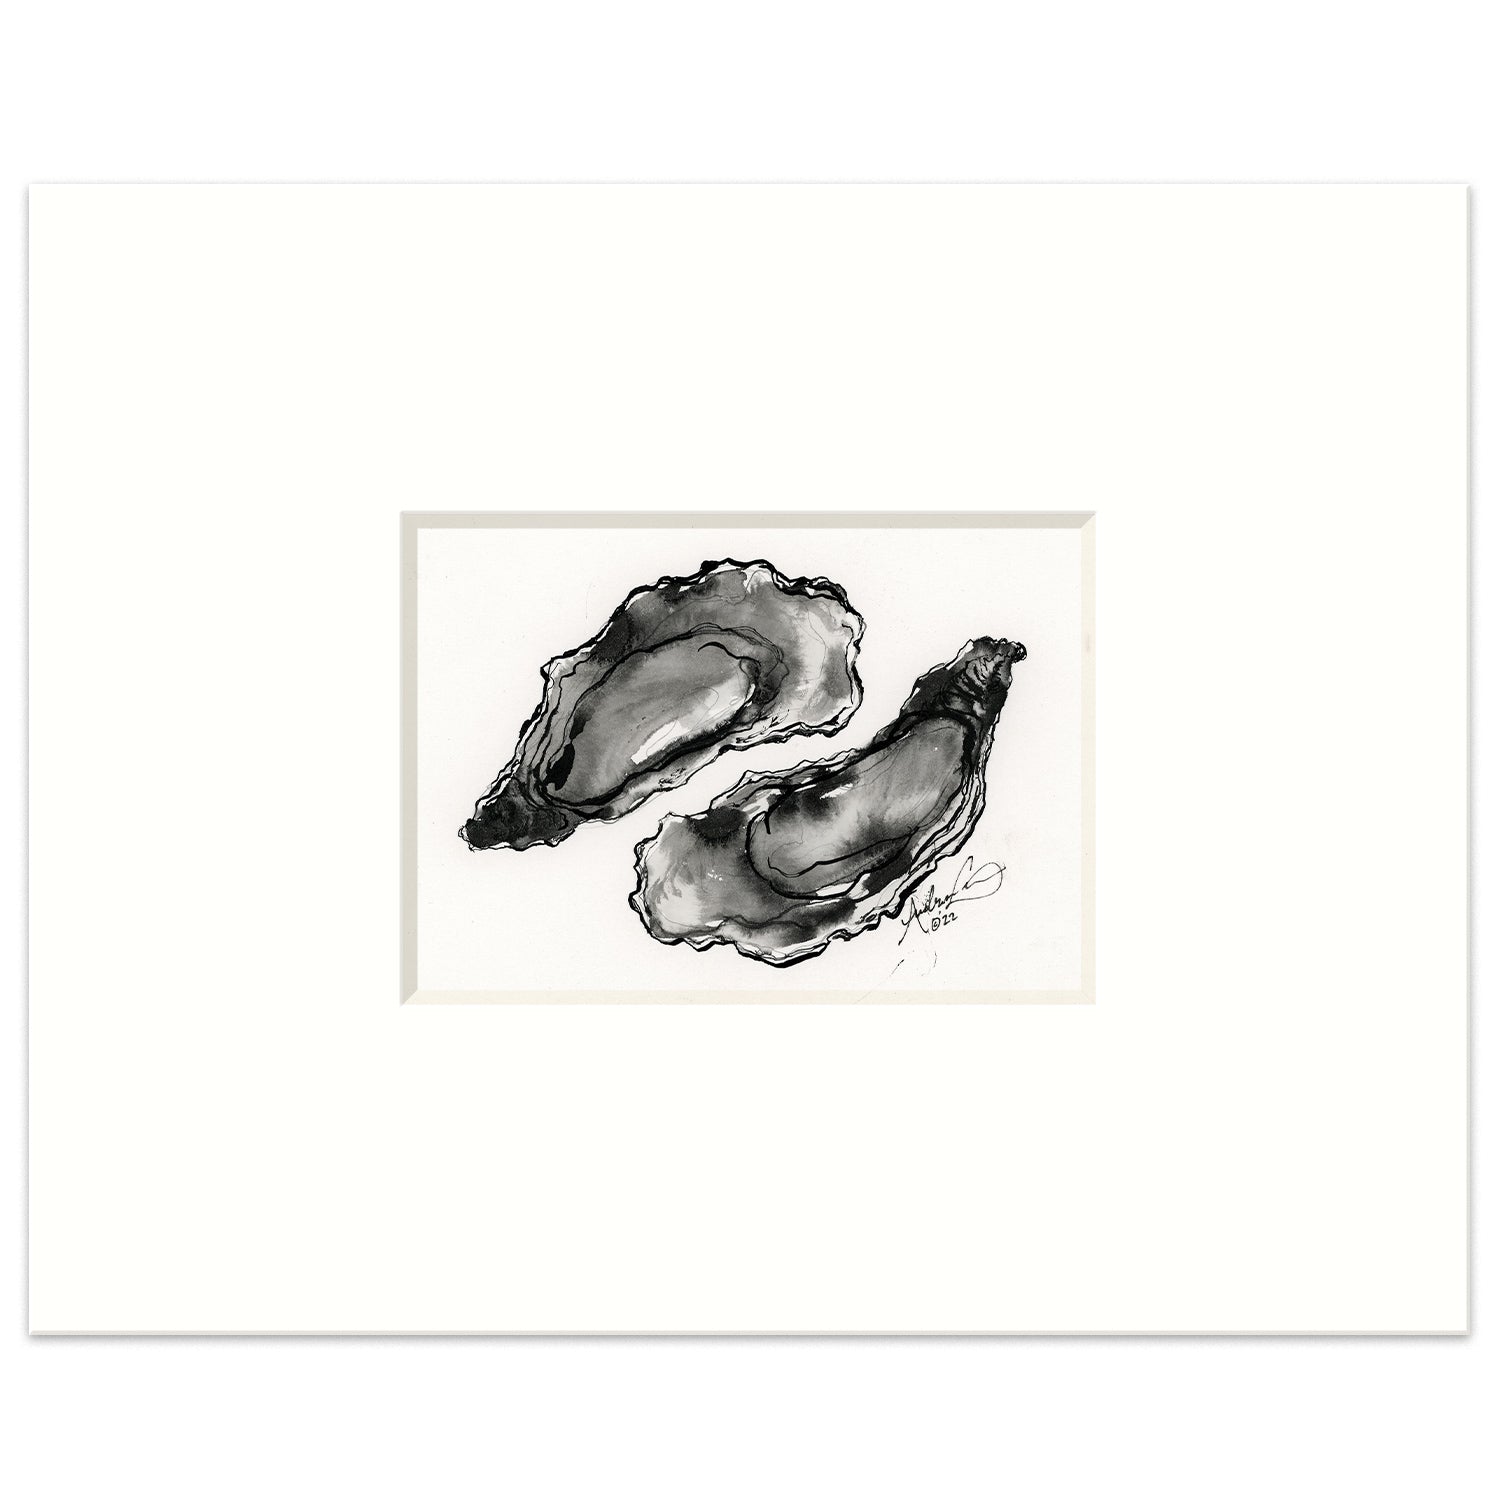 Pair of Oysters 1, 5x7” Original